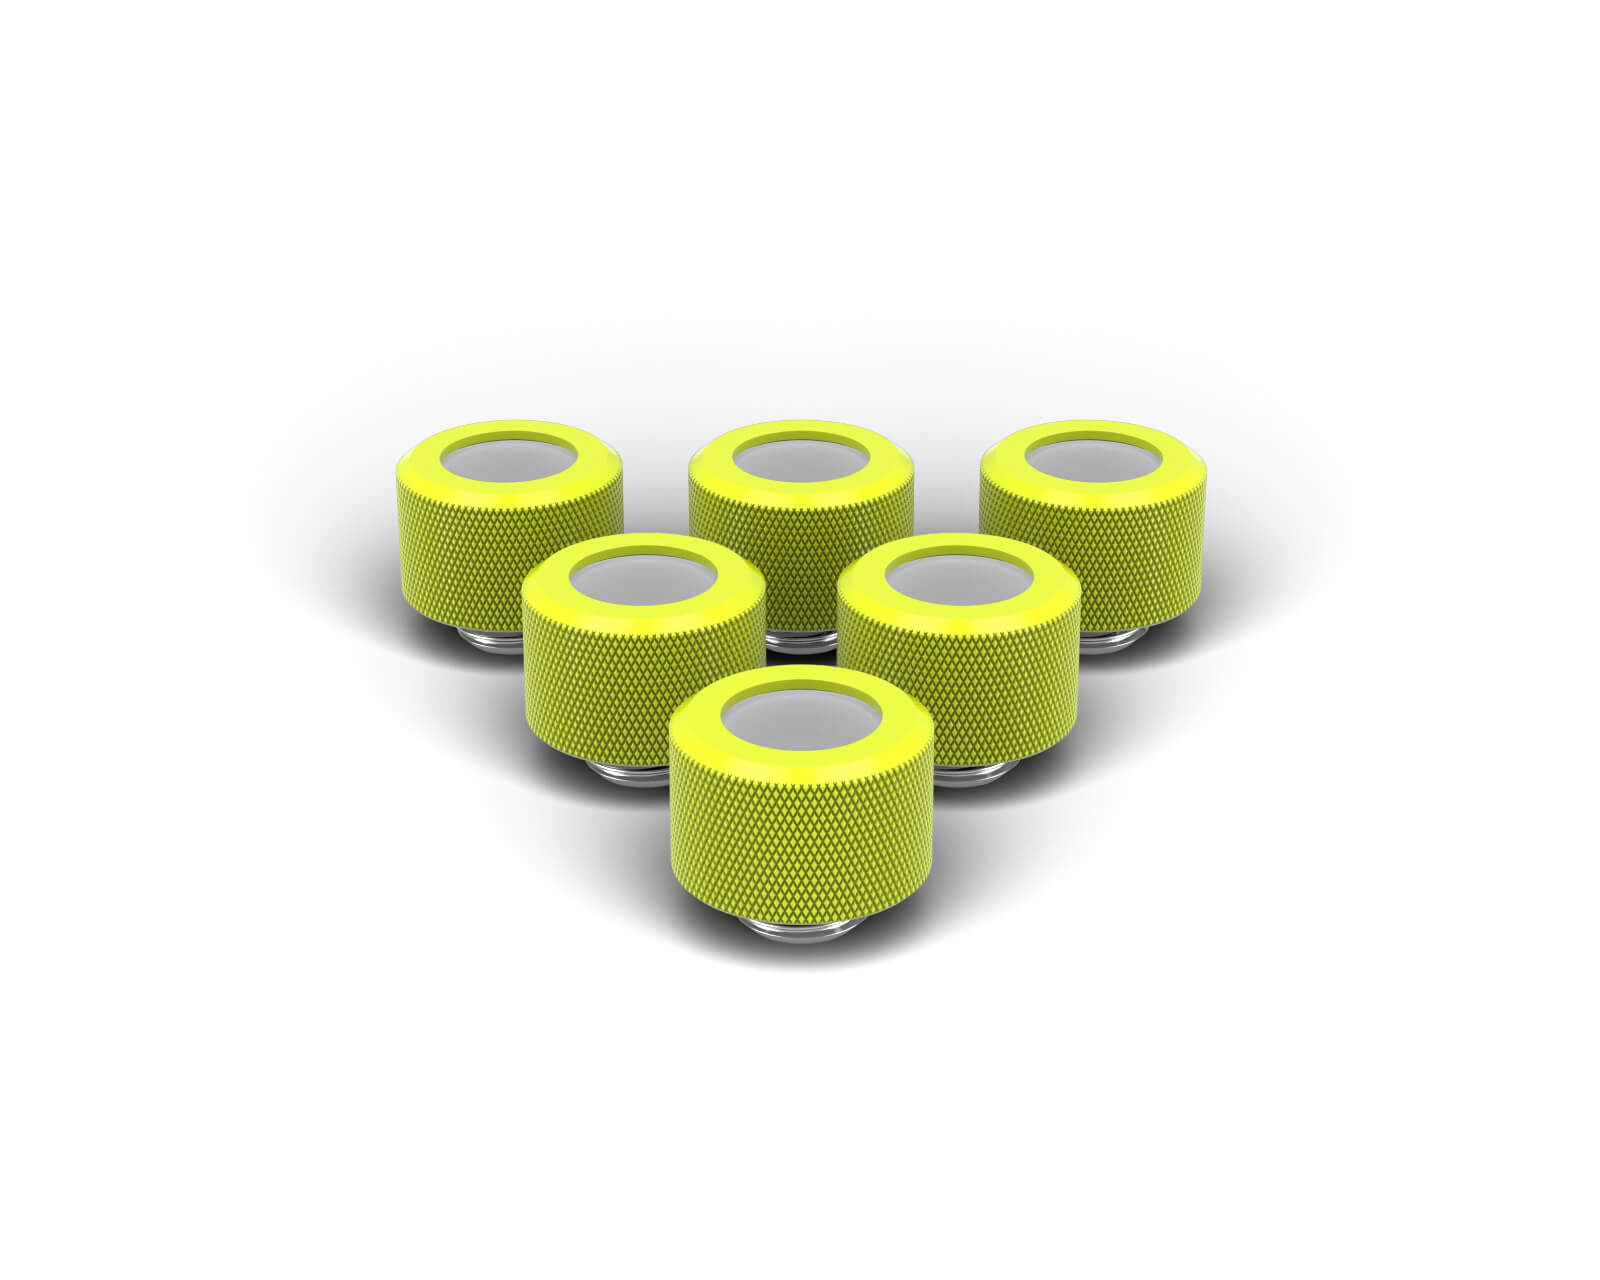 PrimoChill 14mm OD Rigid SX Fitting - 6 Pack - PrimoChill - KEEPING IT COOL Lime Yellow